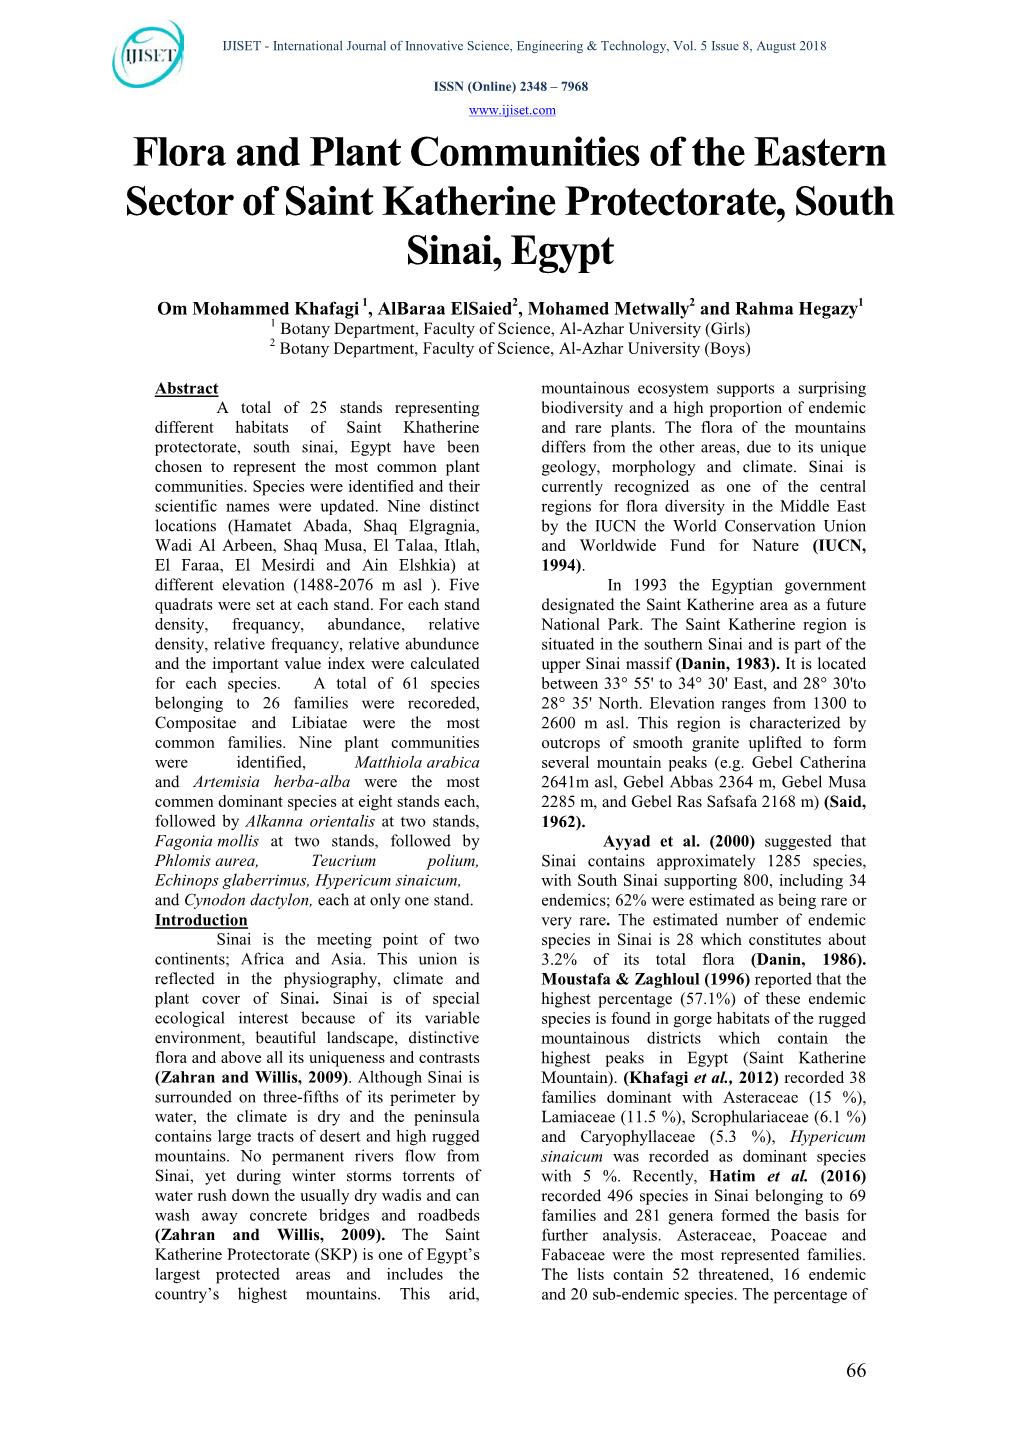 Flora and Plant Communities of the Eastern Sector of Saint Katherine Protectorate, South Sinai, Egypt